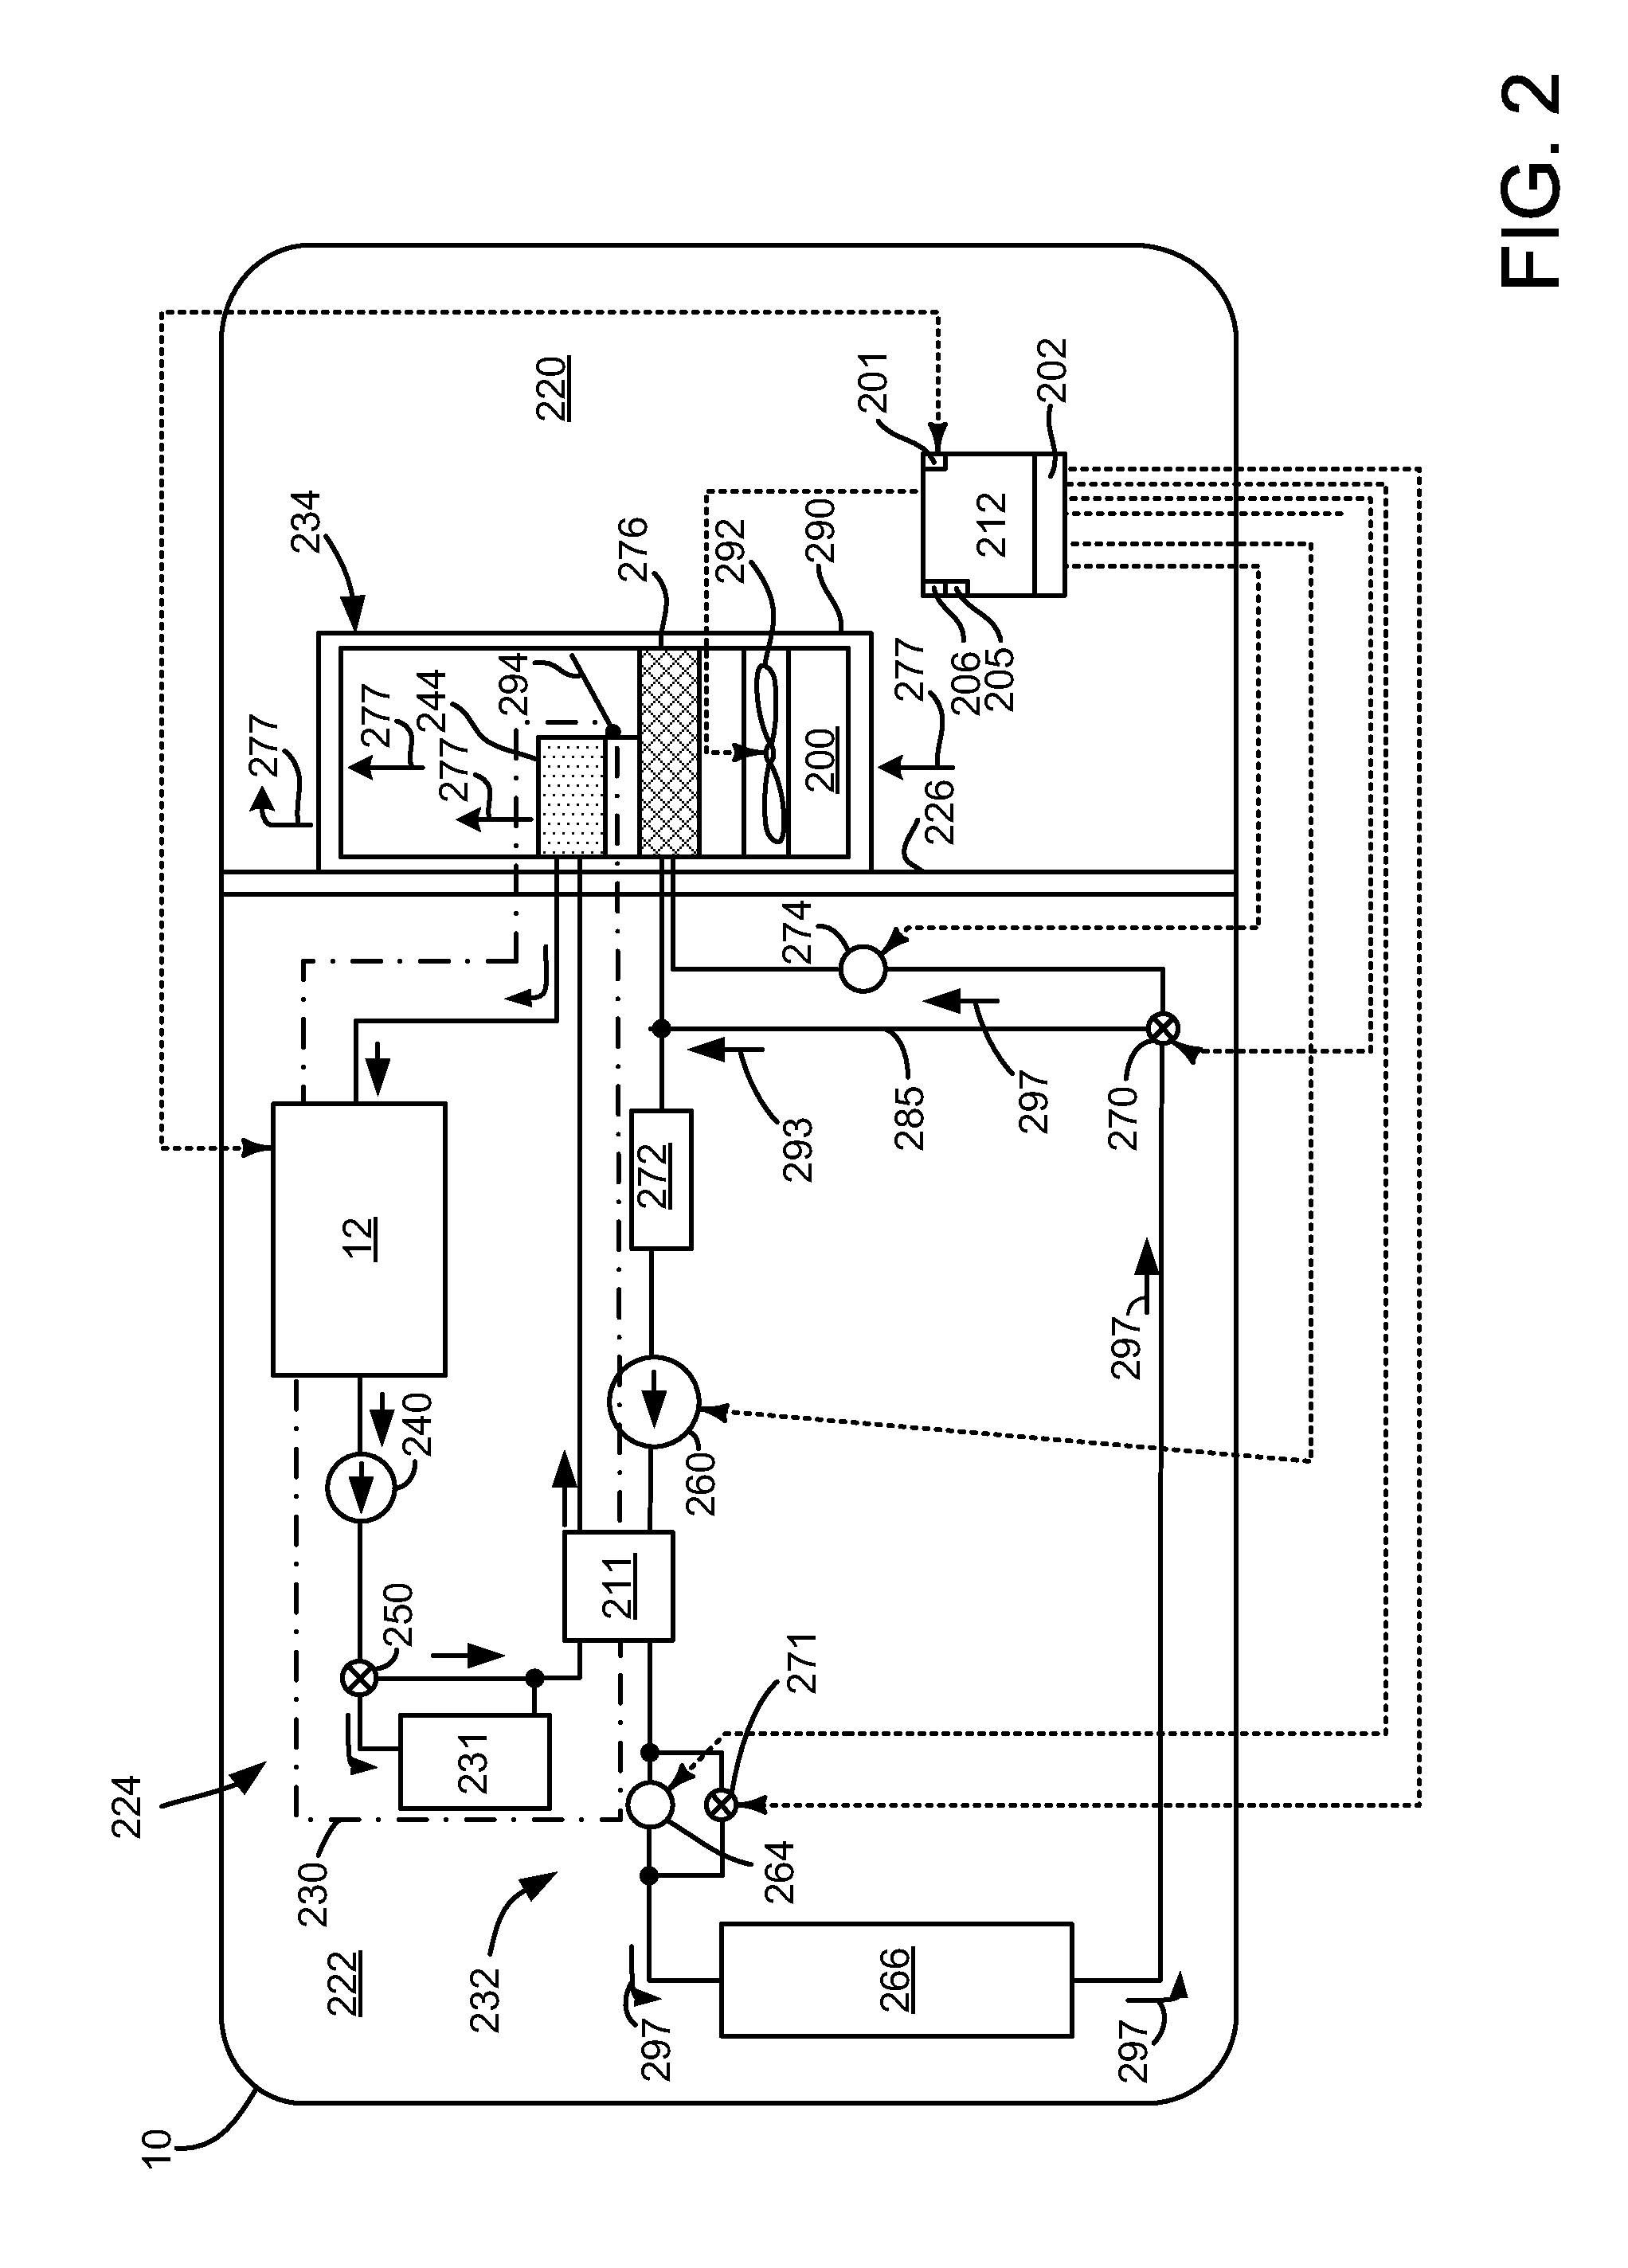 System and method for managing lubricant within a vapor compression heat pump